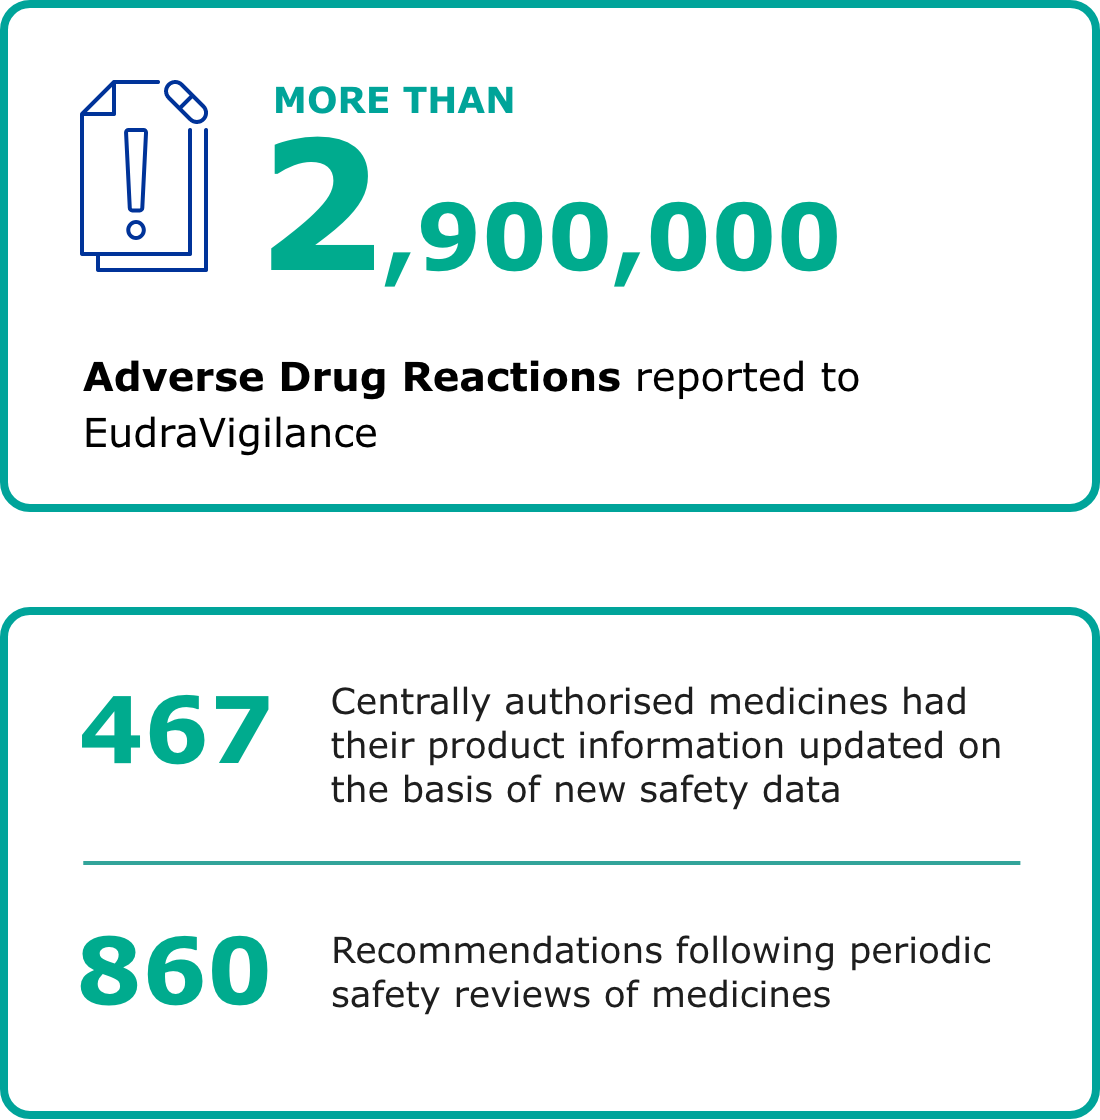 More than 2.9 million adverse drug reactions reported